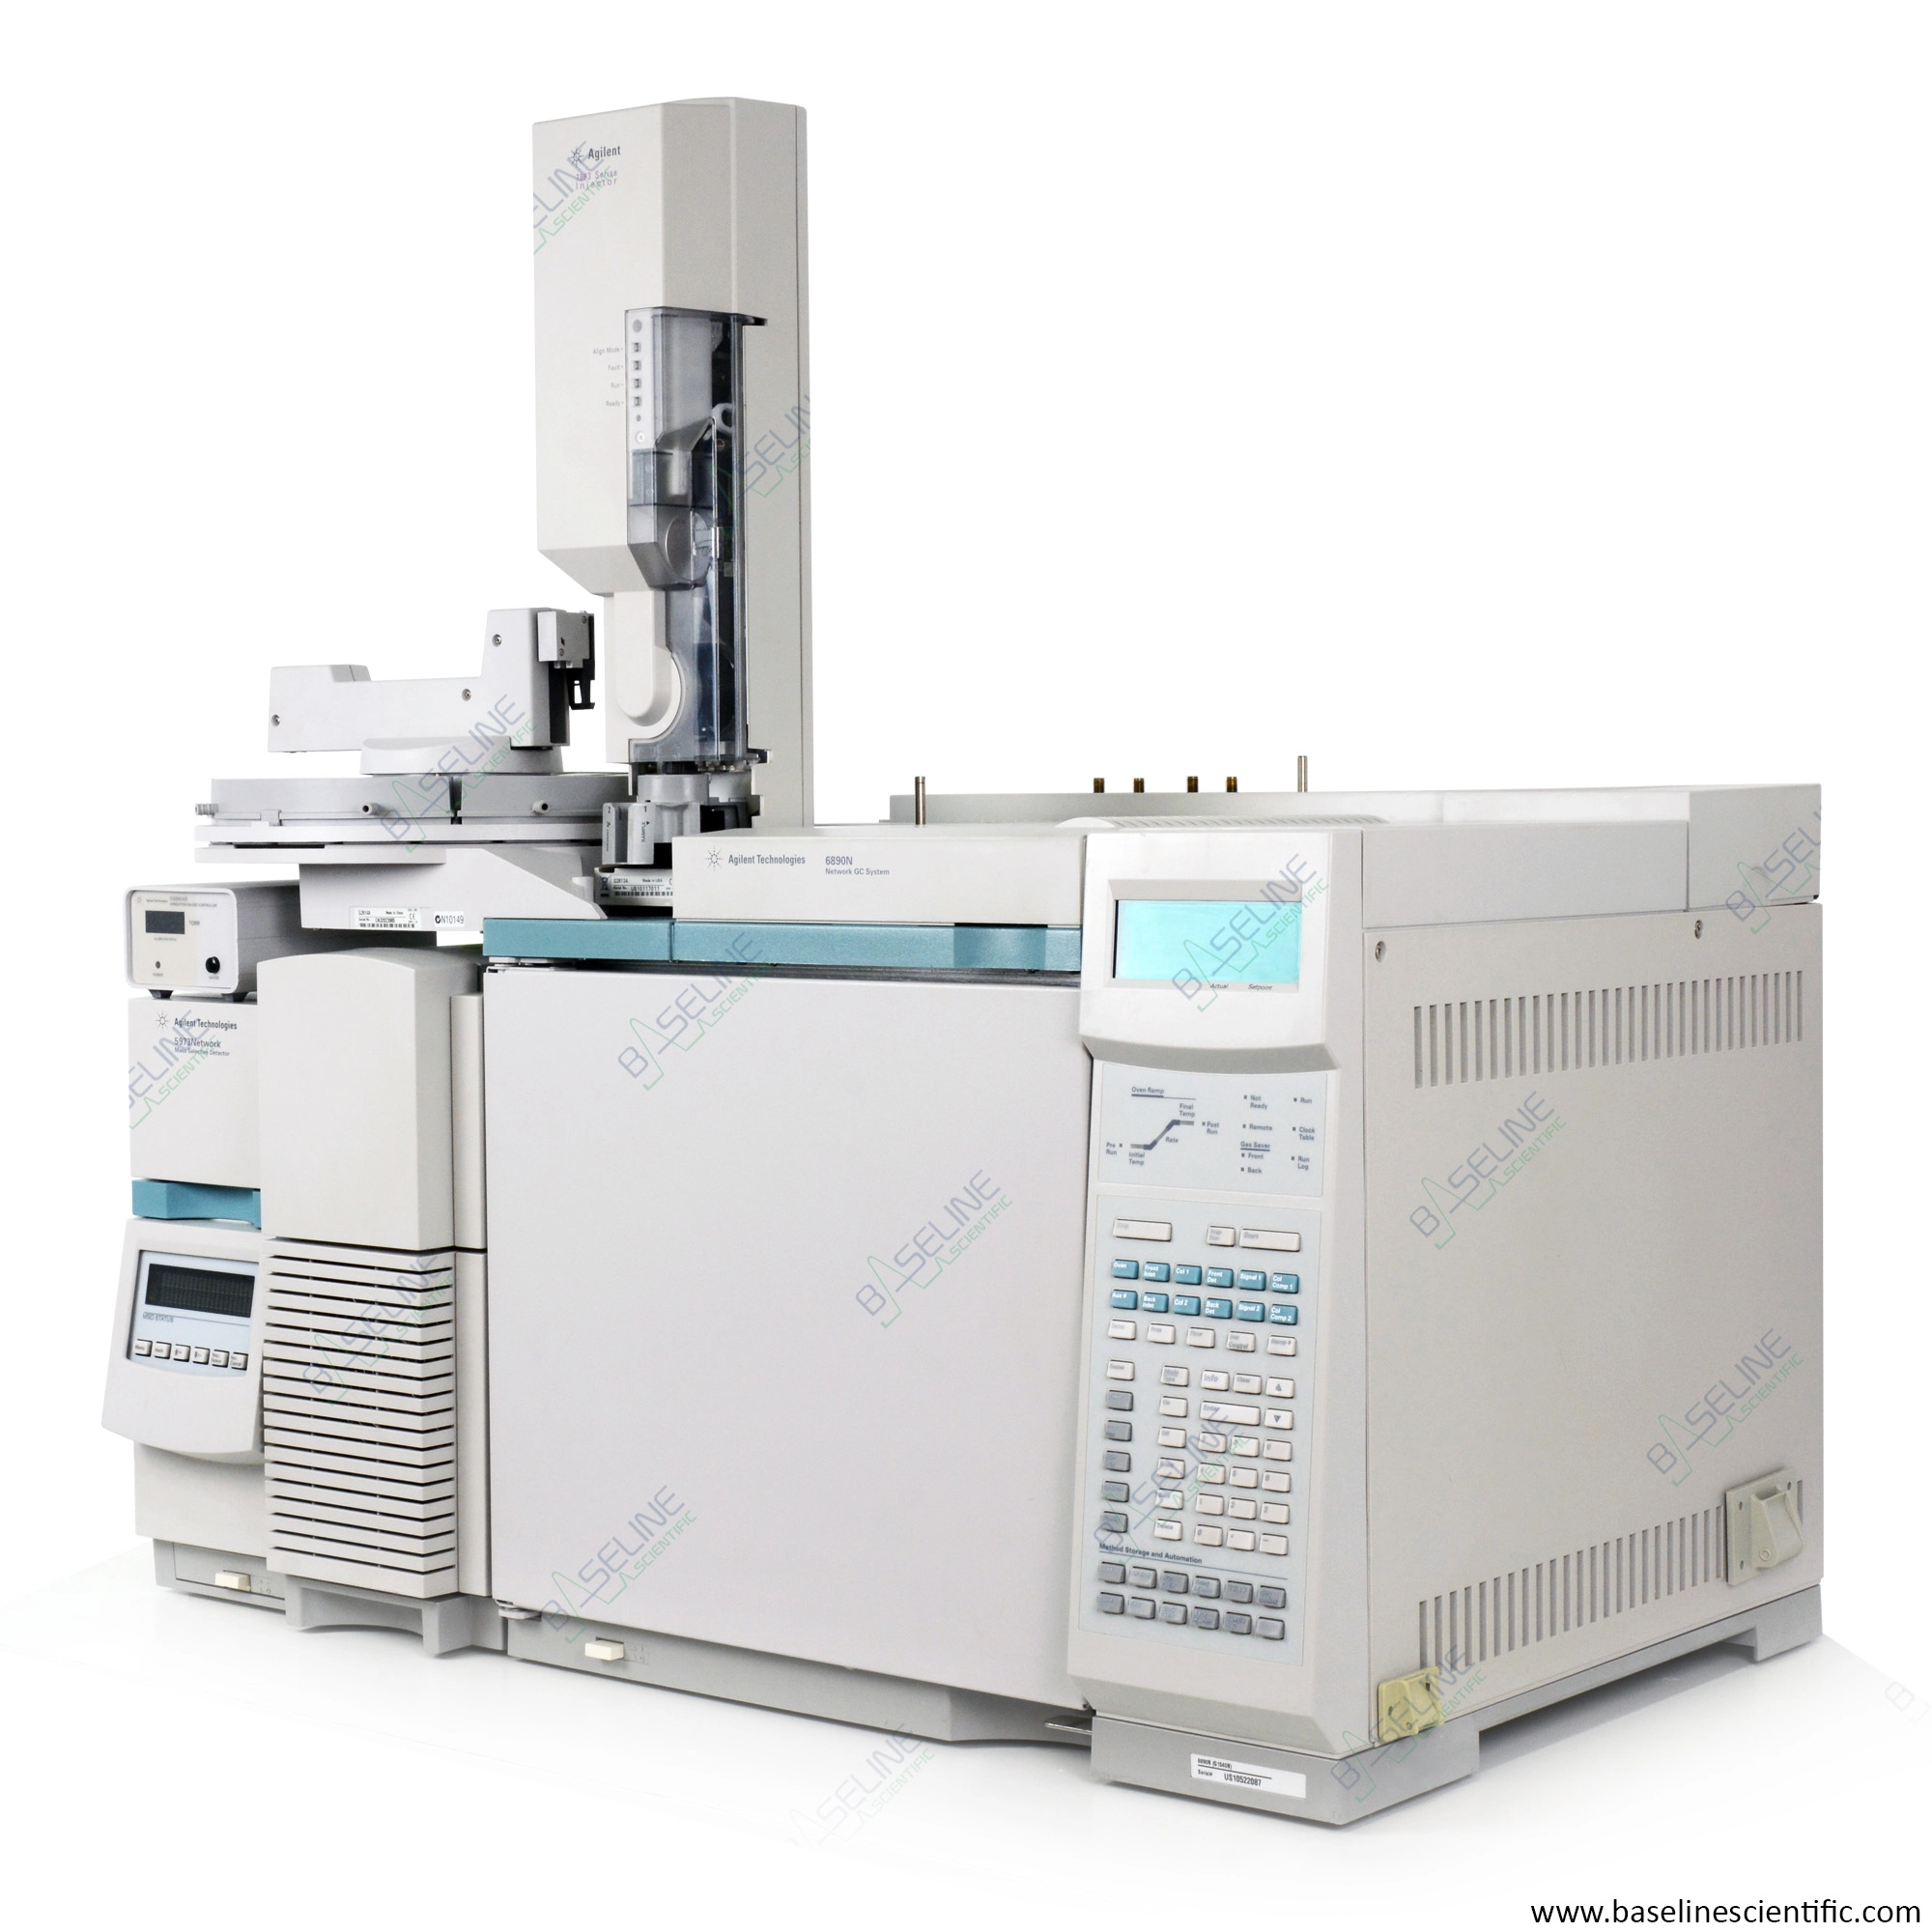 Agilent 6890N GC with 5973N MSD Performance Turbo and 7683 Autosampler